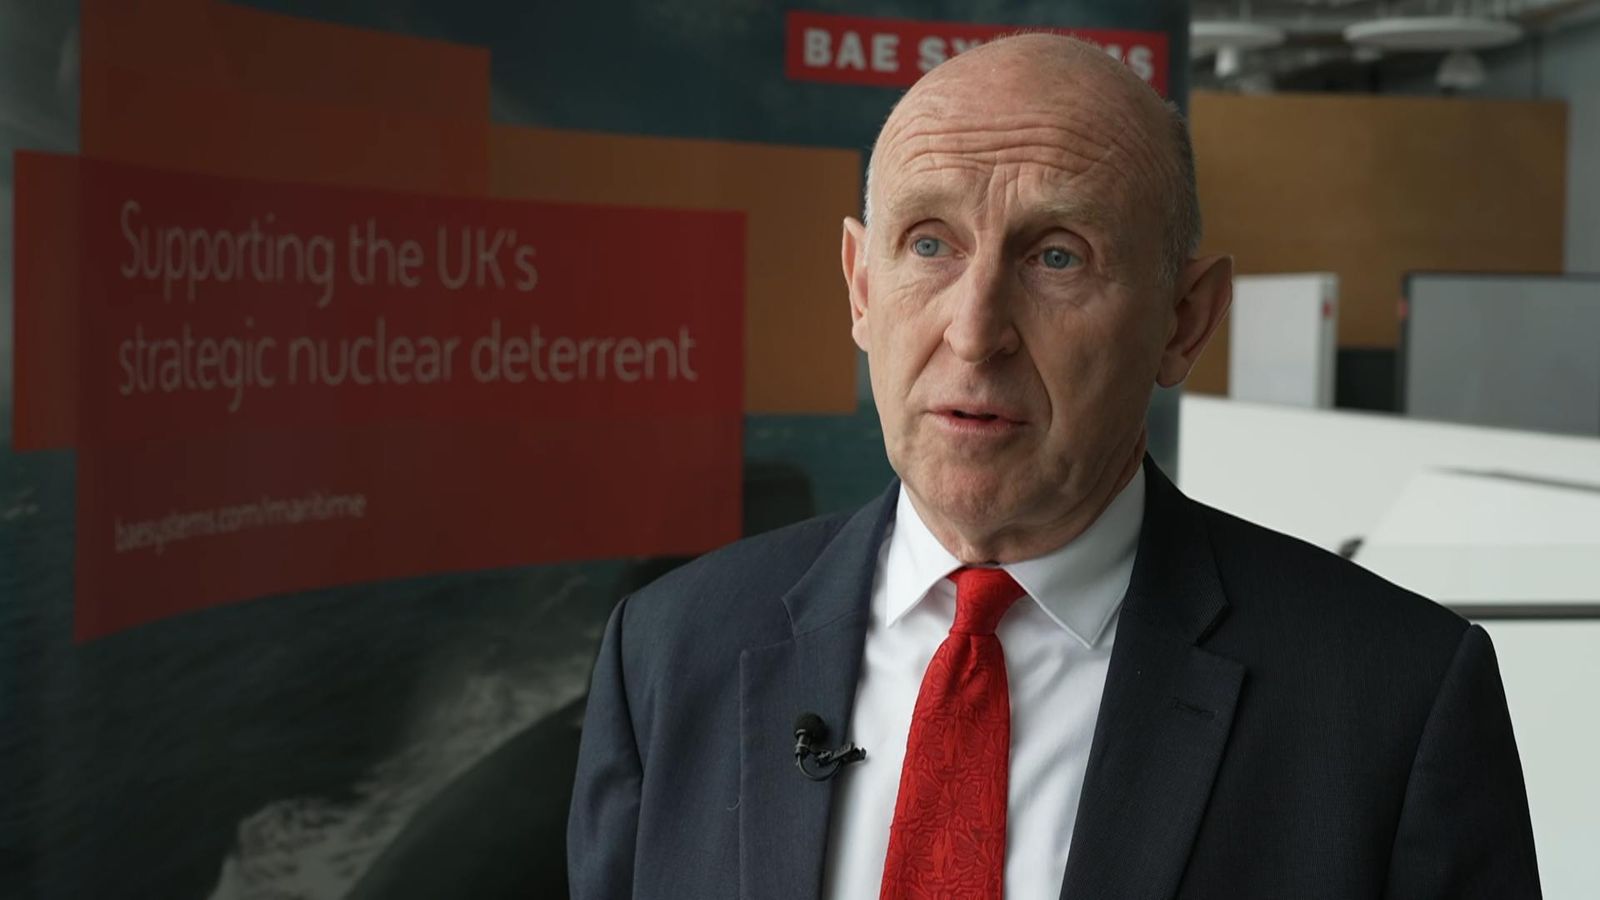 Contractor SSCL runs MoD system hacked by China, Labour MP John Healey claims